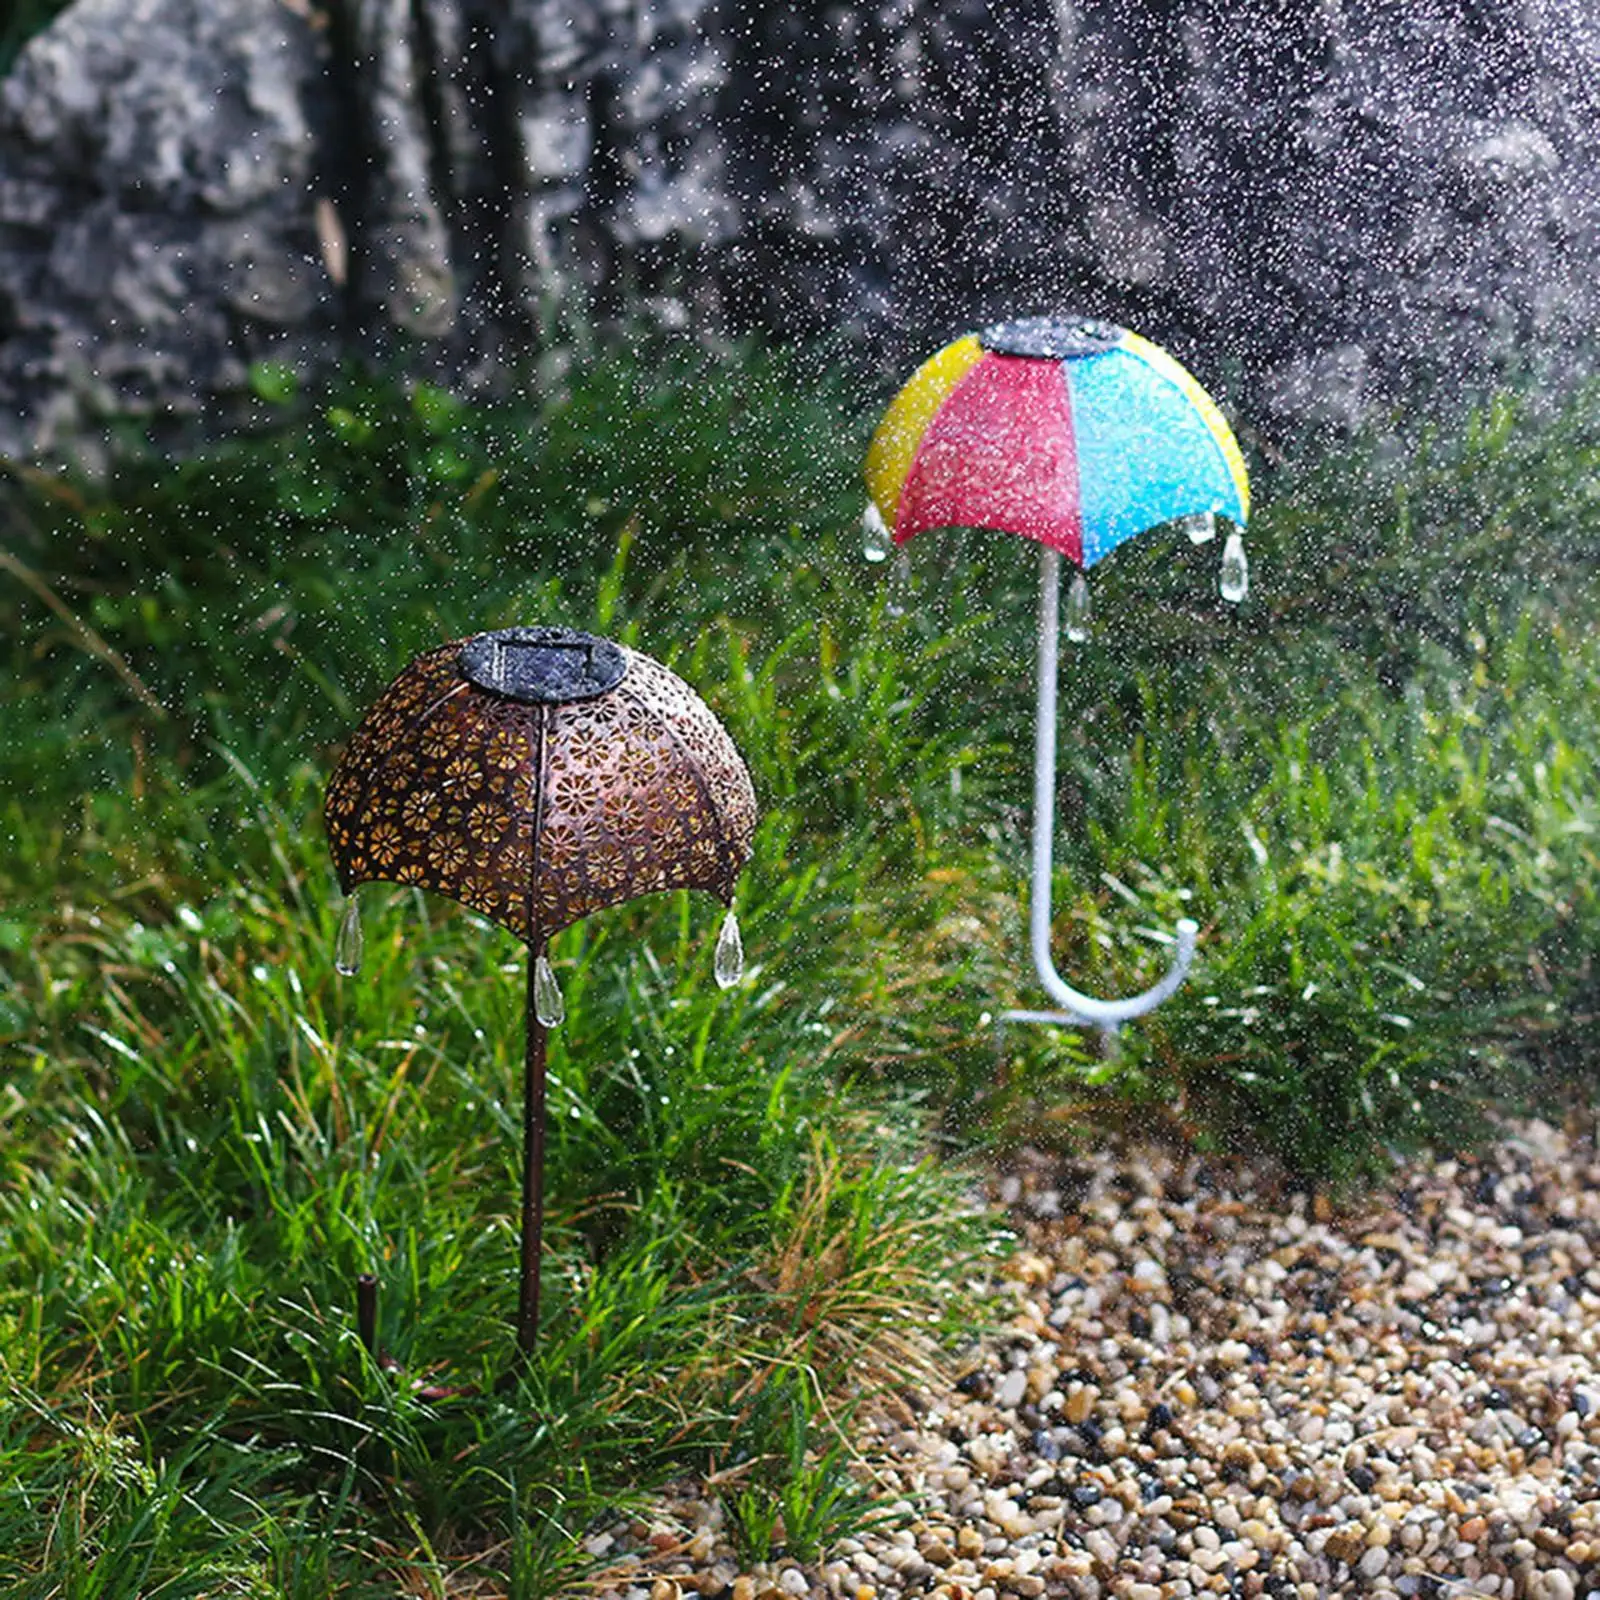 Umbrella Shaped Lawn Light Driveway Lighting Landscape Lamp Solar LED Lights for Lawn Courtyard Pathway Patio Decoration